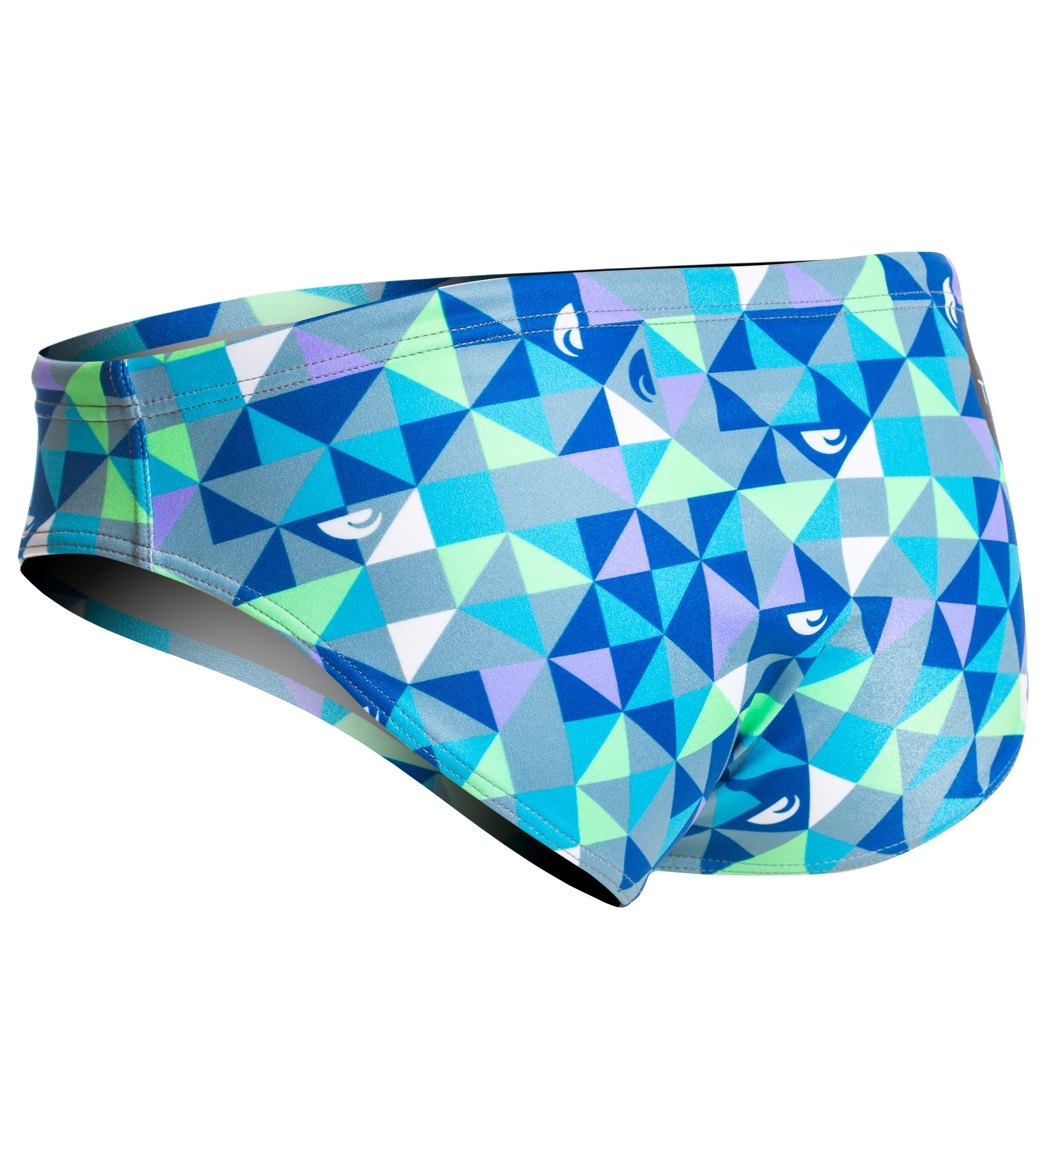 Turbo Men's Origami Water Polo Brief at SwimOutlet.com - Free Shipping